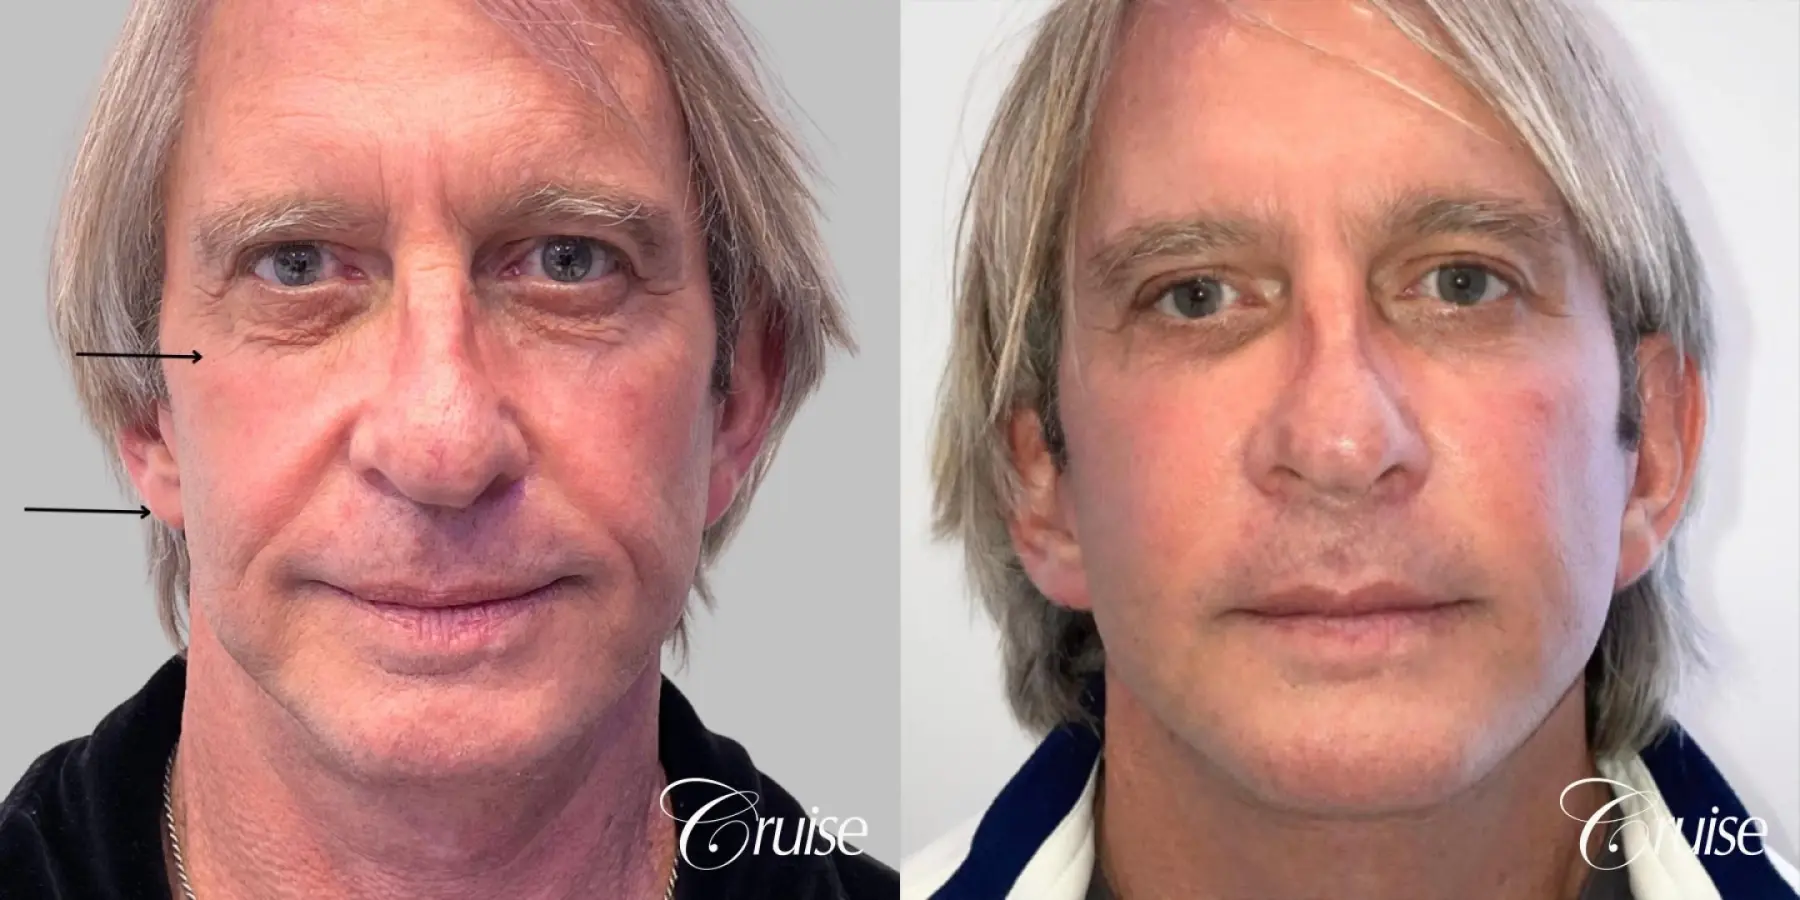 Fat Transfer - Cheeks, Tear Trough, Nasal Labial Folds - Male Patient - Before and After  